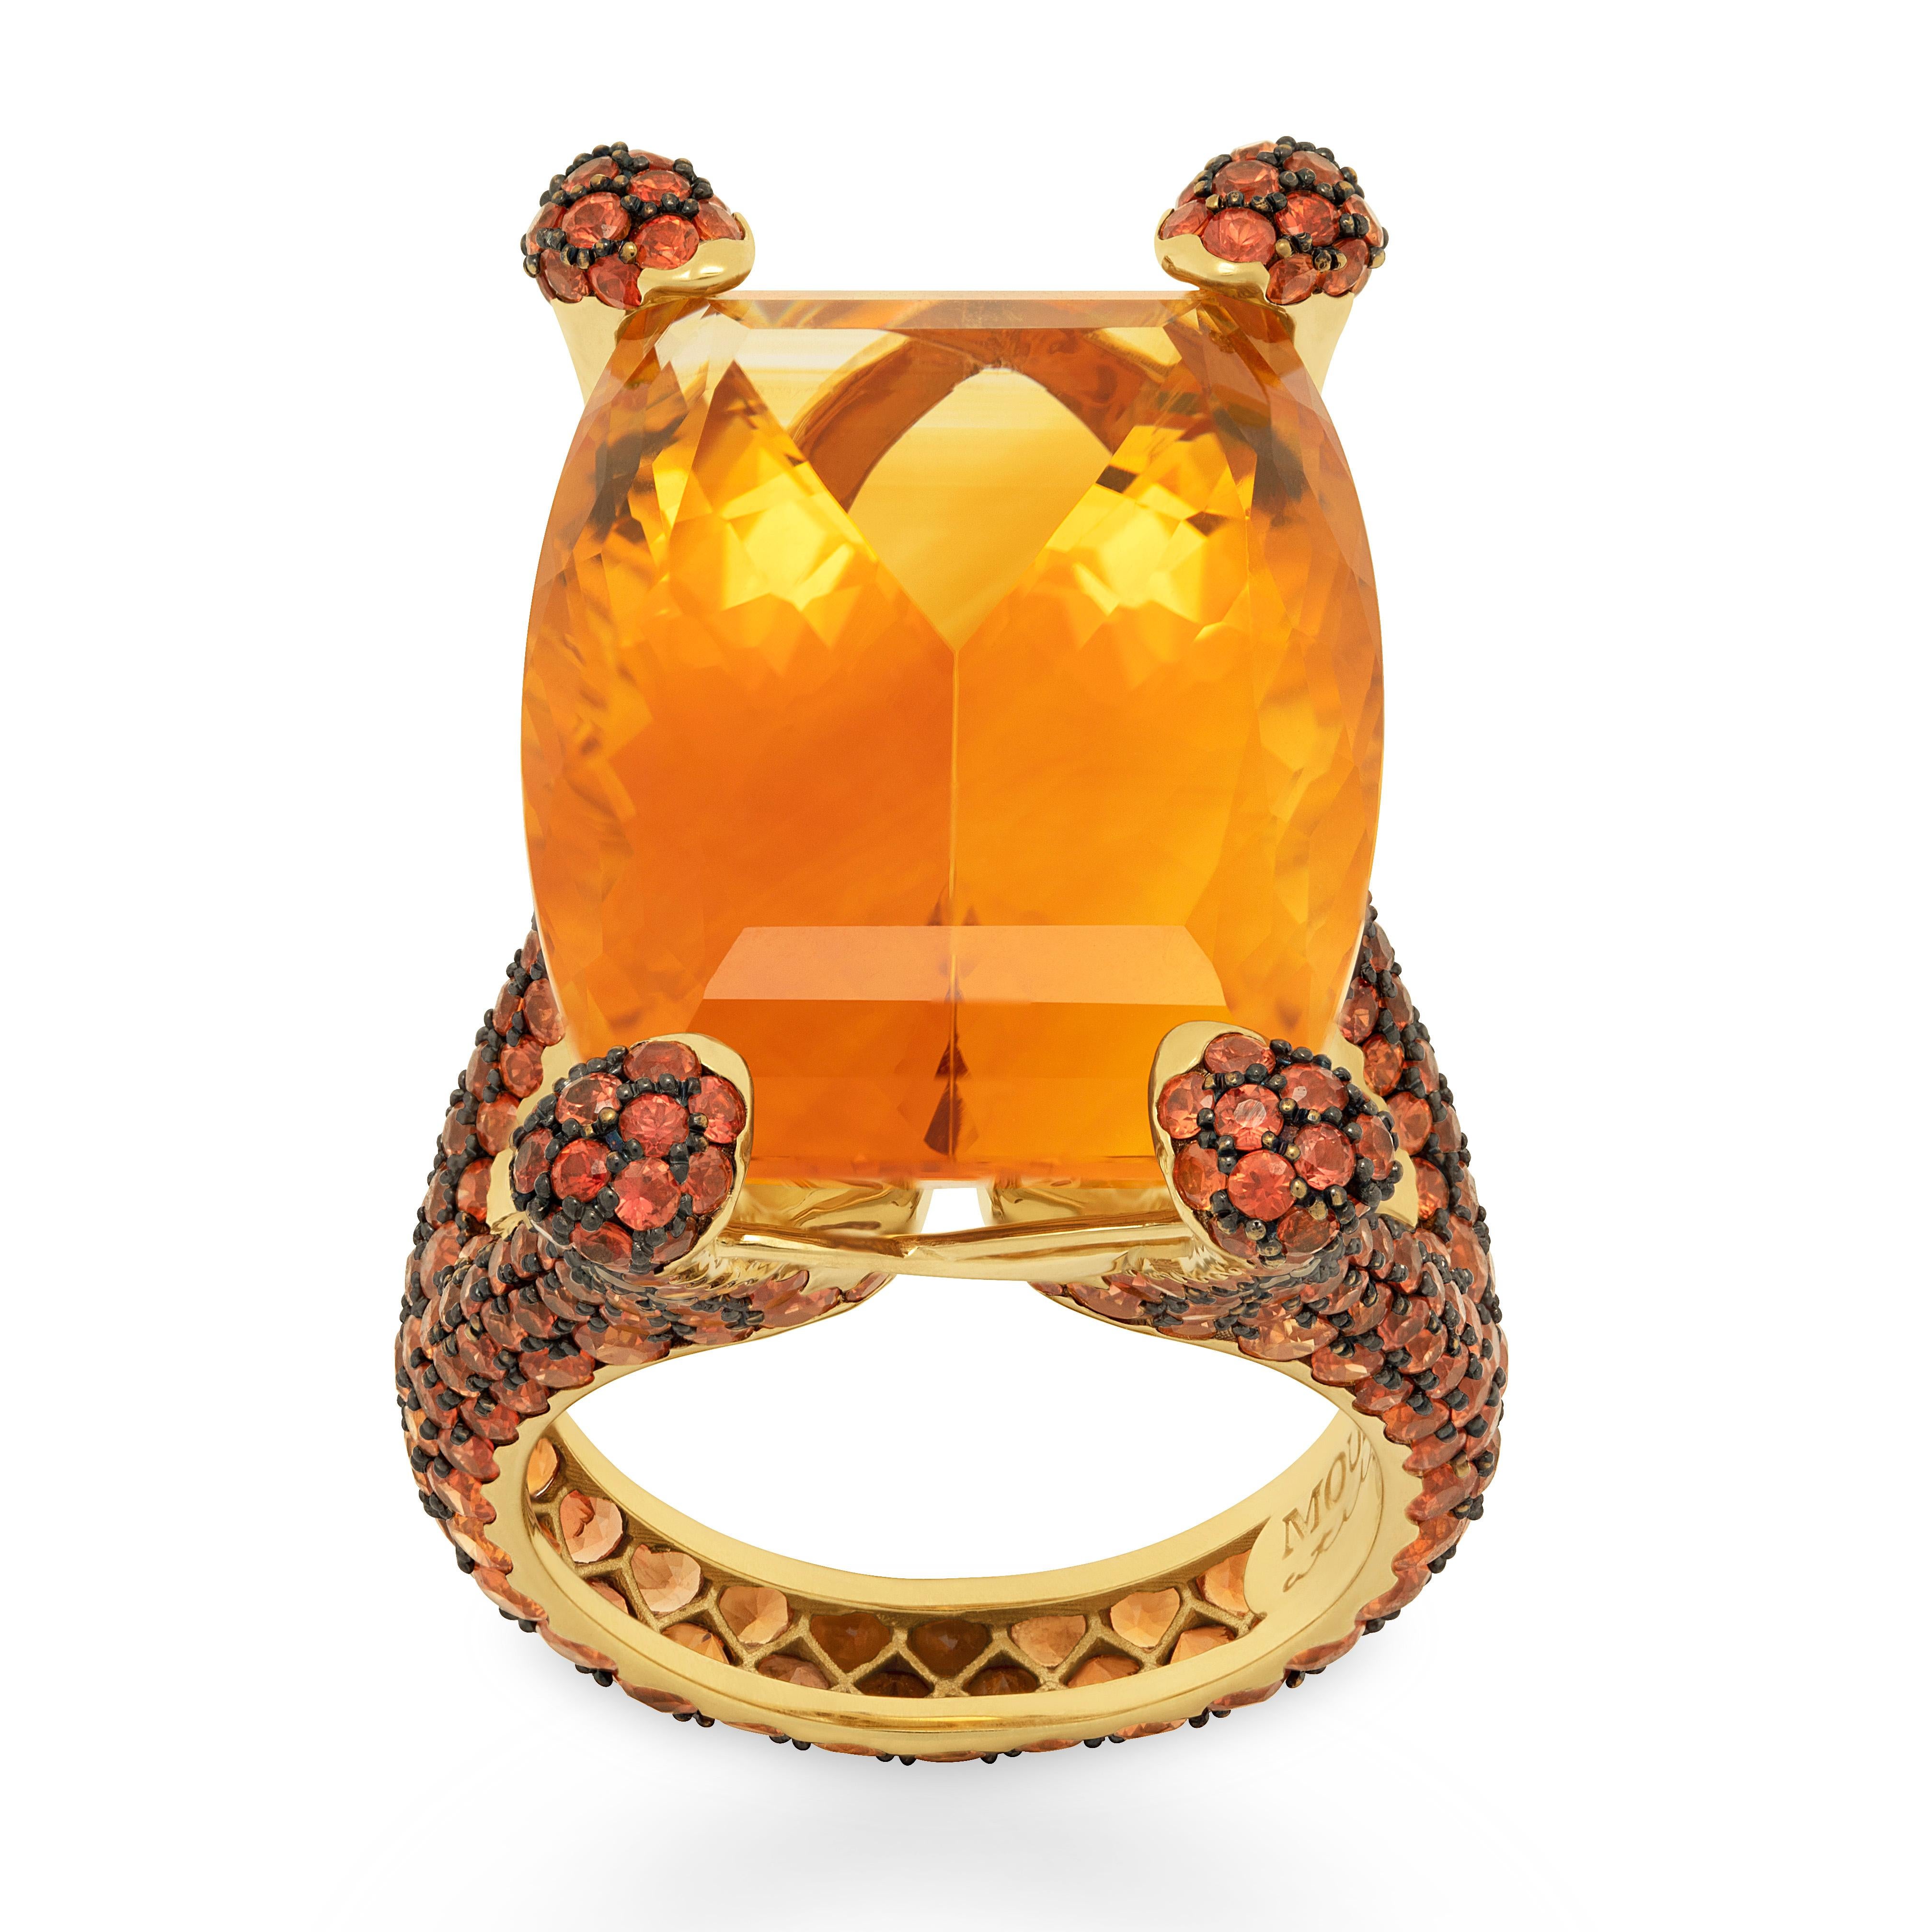 Citrine 33.27 Carat Orange Sapphires 18 Karat Yellow Gold Ring
Highlighting a 33.27 Carat Citrine and 358 Orange Sapphires weighing 7.72 Carats are mounted on an 18 Karat Gold lined with black rhodium. It displays a riveting interplay of contrast